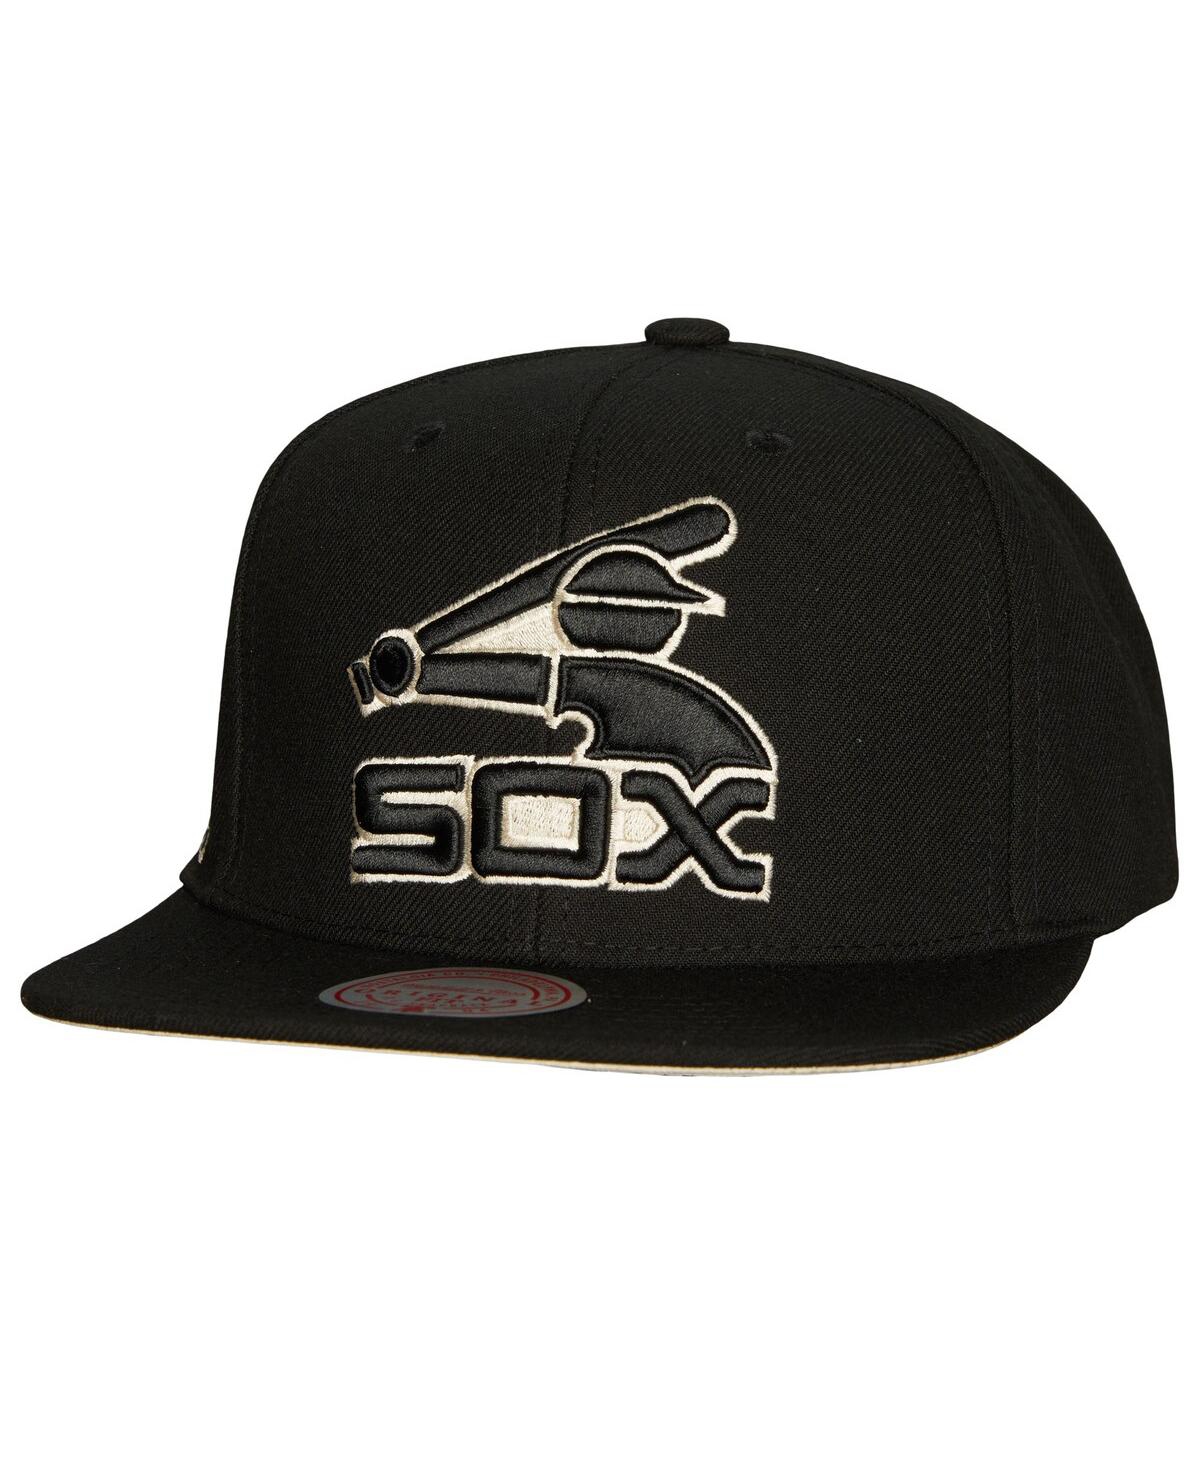 Mitchell & Ness Men's  Black Chicago White Sox Cooperstown Collection True Classics Snapback Hat